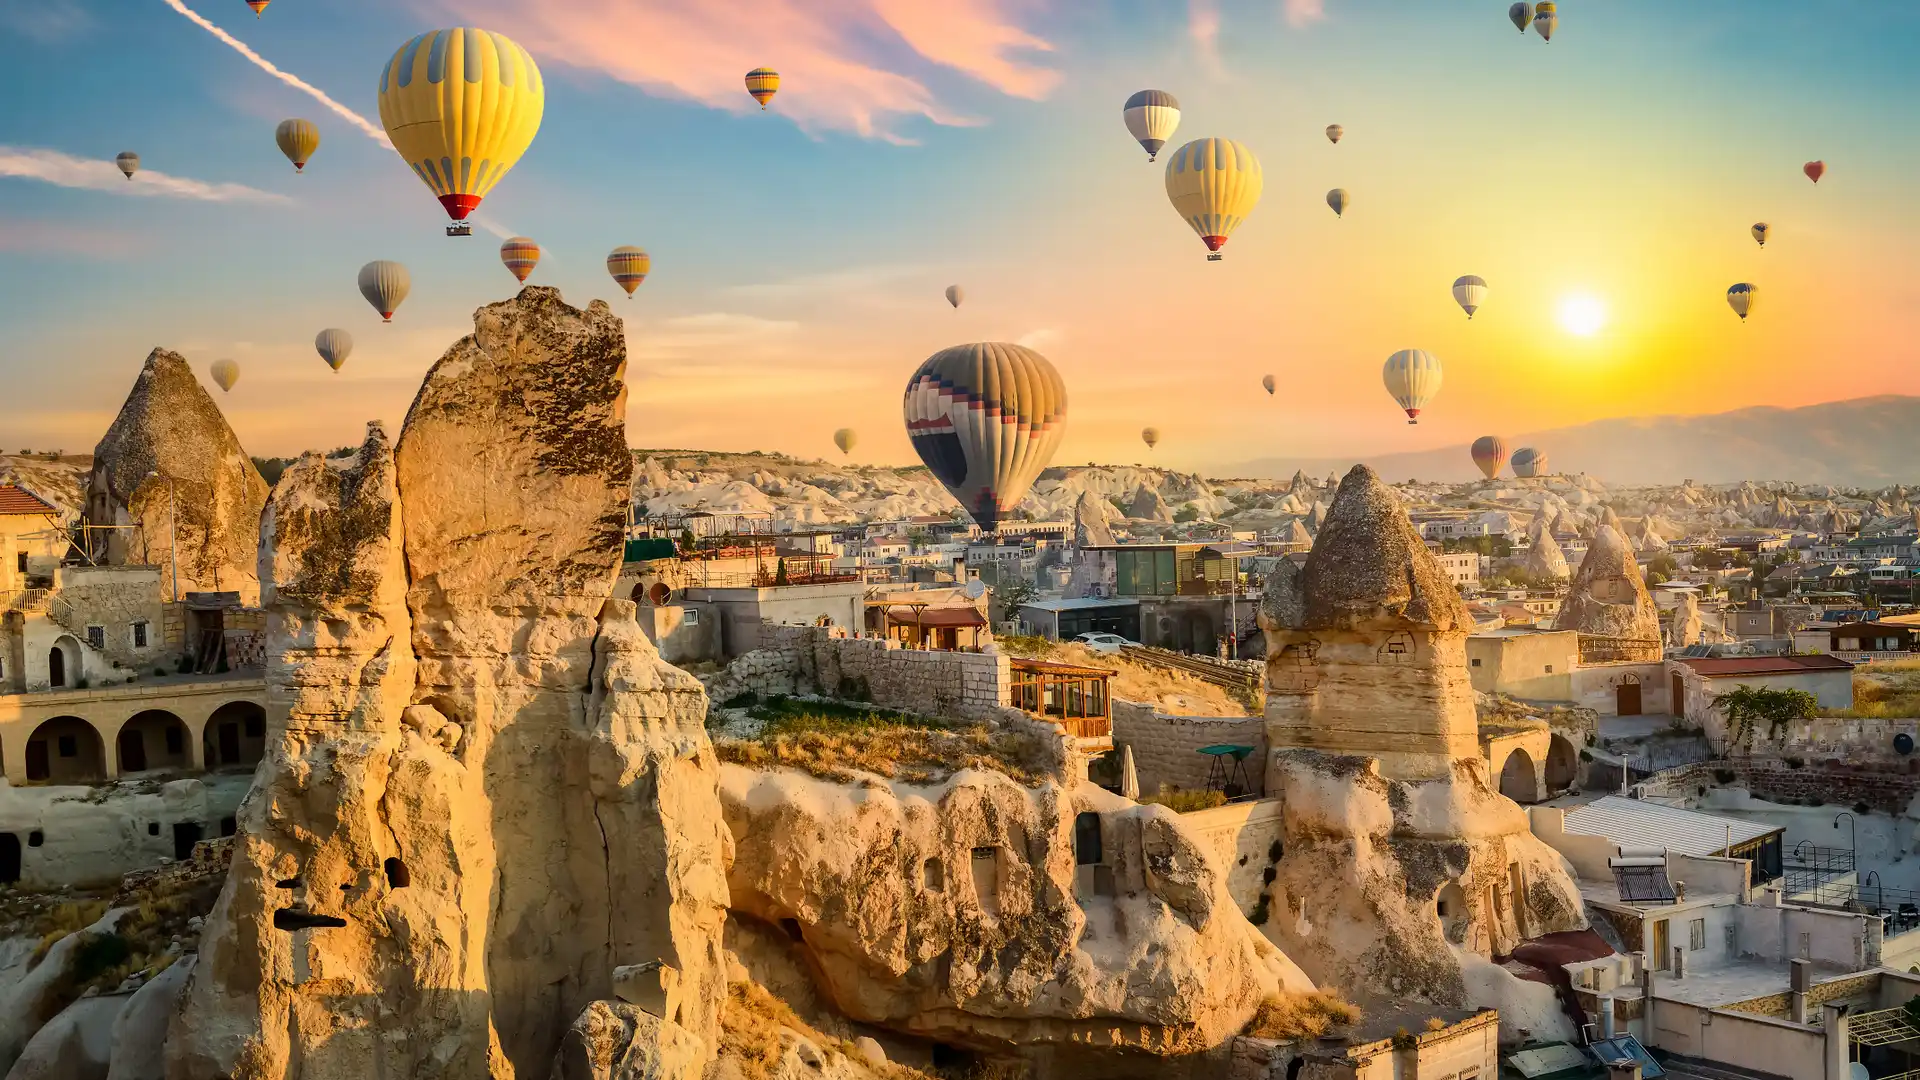 Tourists enjoying the hot air ballons in Turkey because the have hired roaming in this country